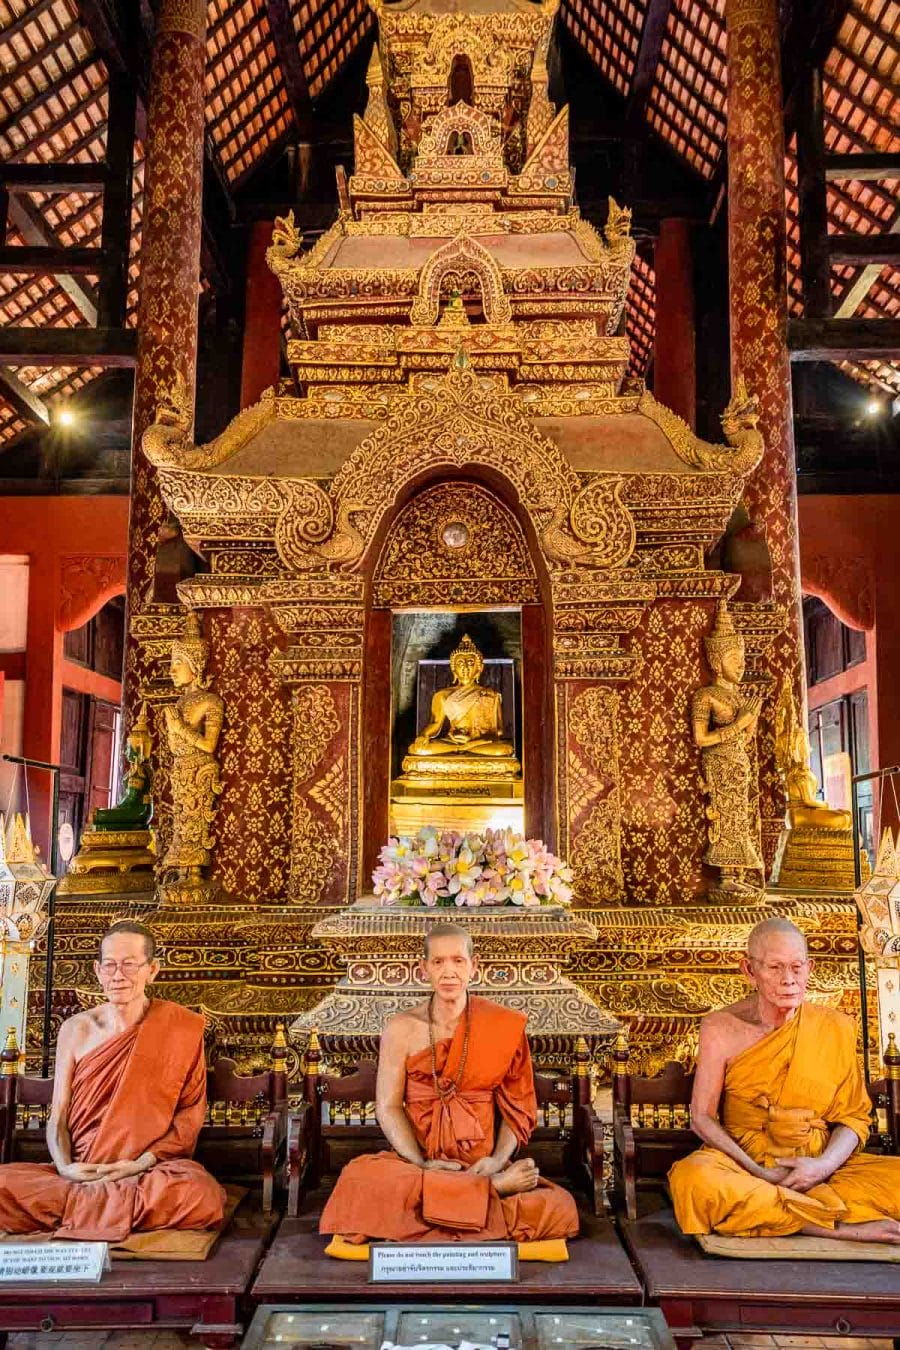 Monks made of vax sitting in front of a Buddha statue in Wat Phra Singh Temple in Chiang Mai